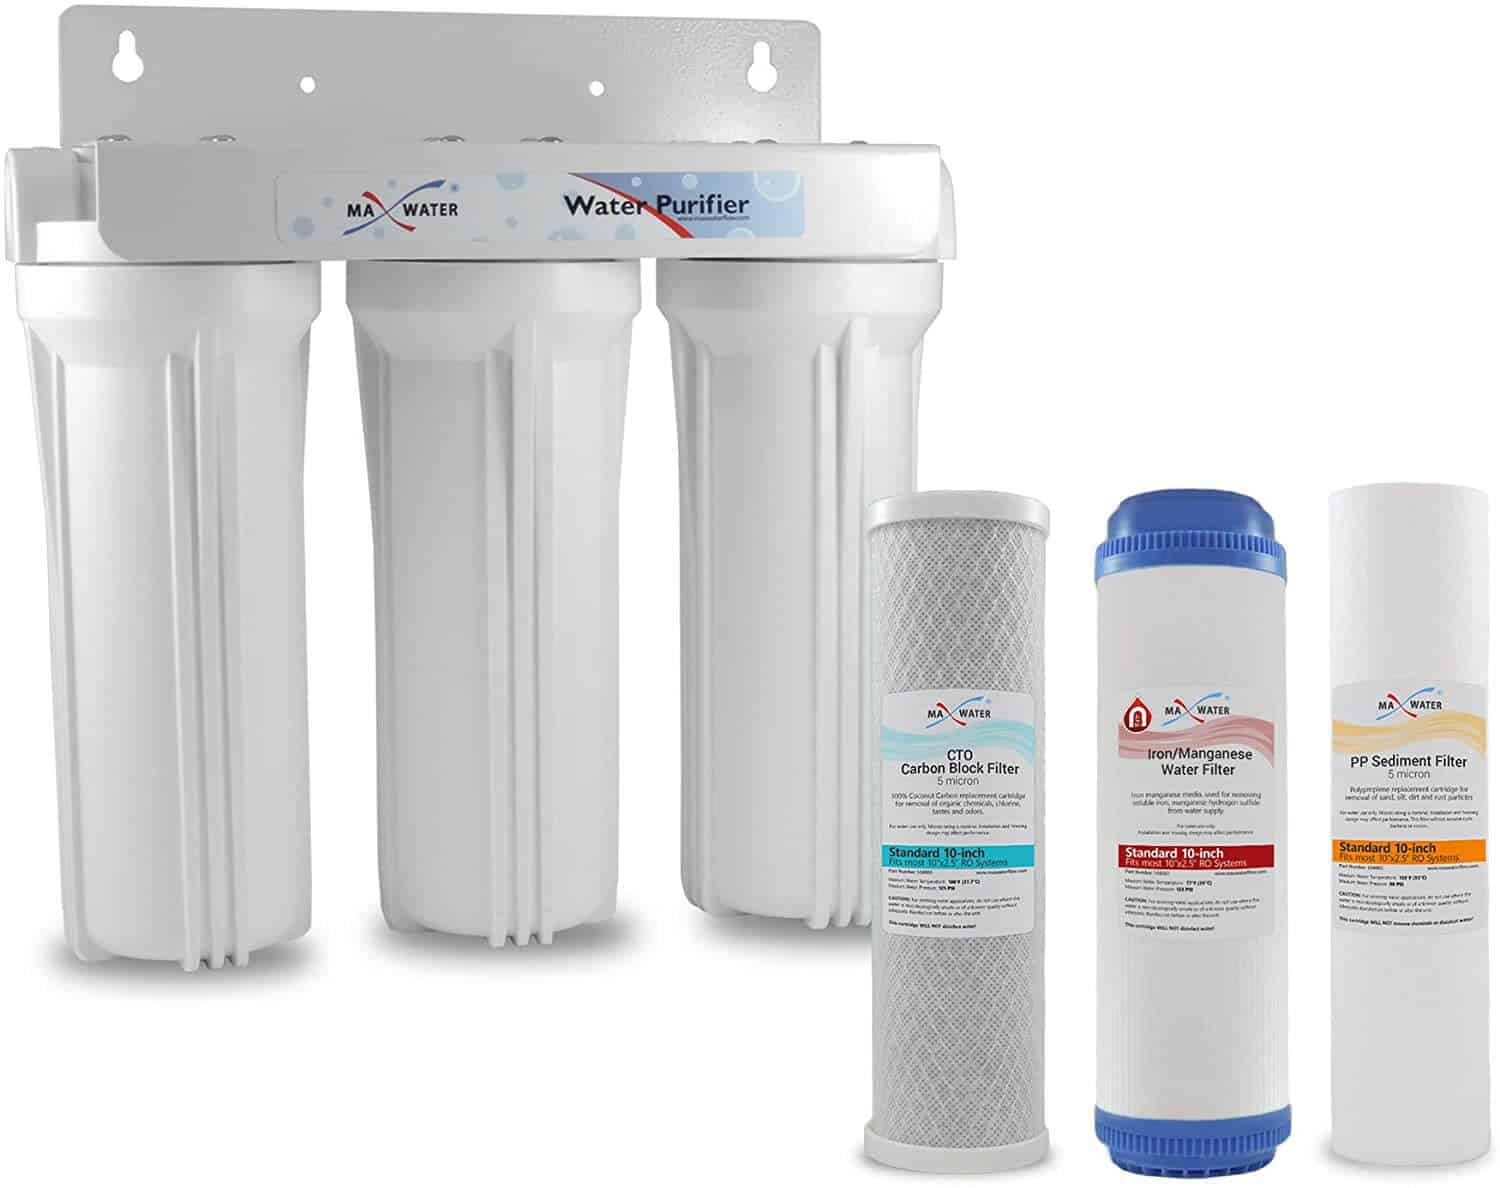 Max Water 3 Stages 10x 2.5 34 Port Whole House Iron Manganese Water Filter